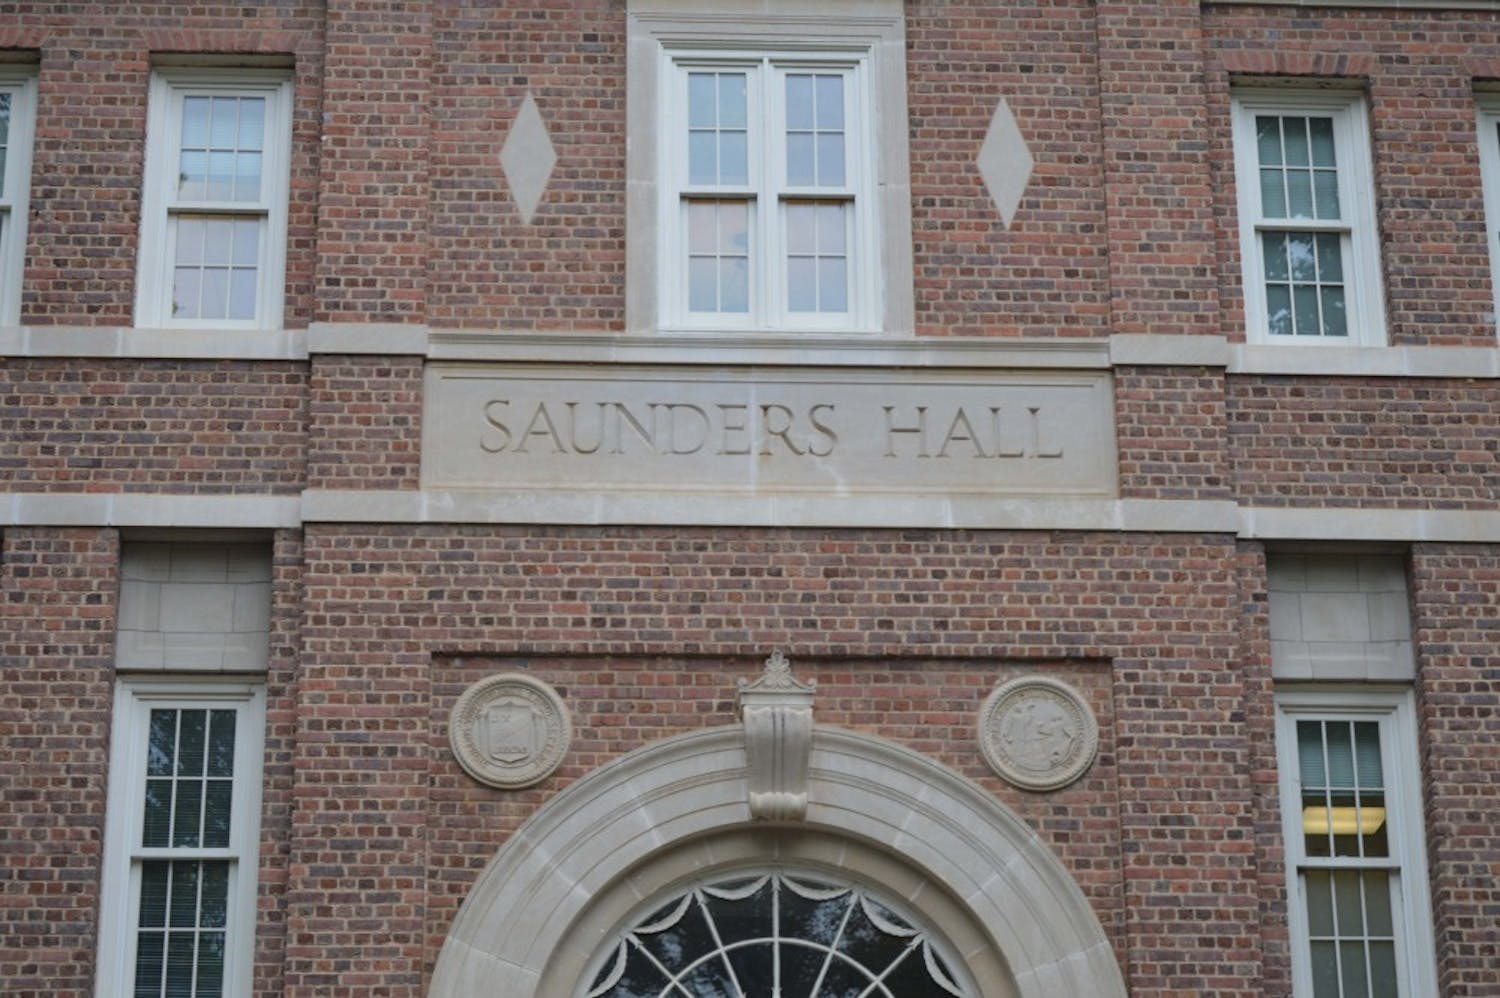 One side of the recently renamed Carolina Hall still reads "Saunders Hall."